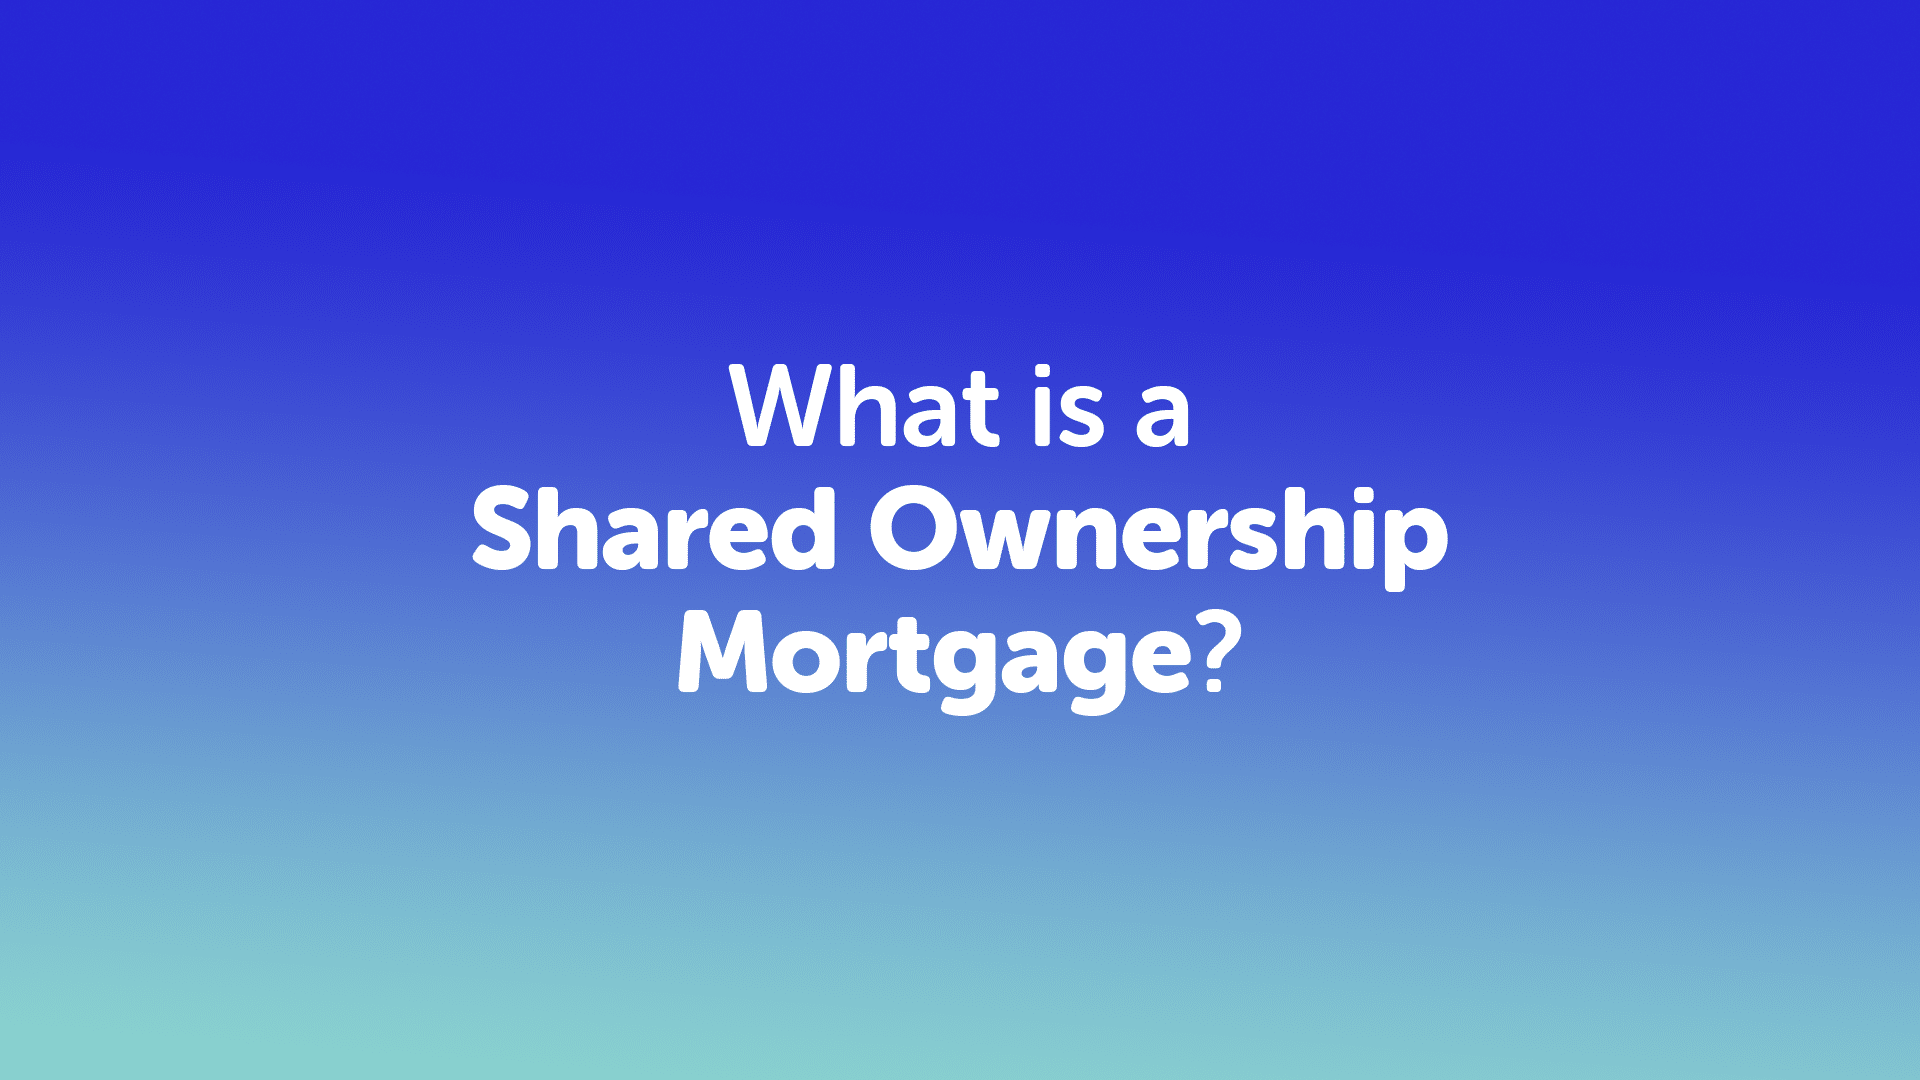 What is a Shared Ownership Mortgage in Manchester?